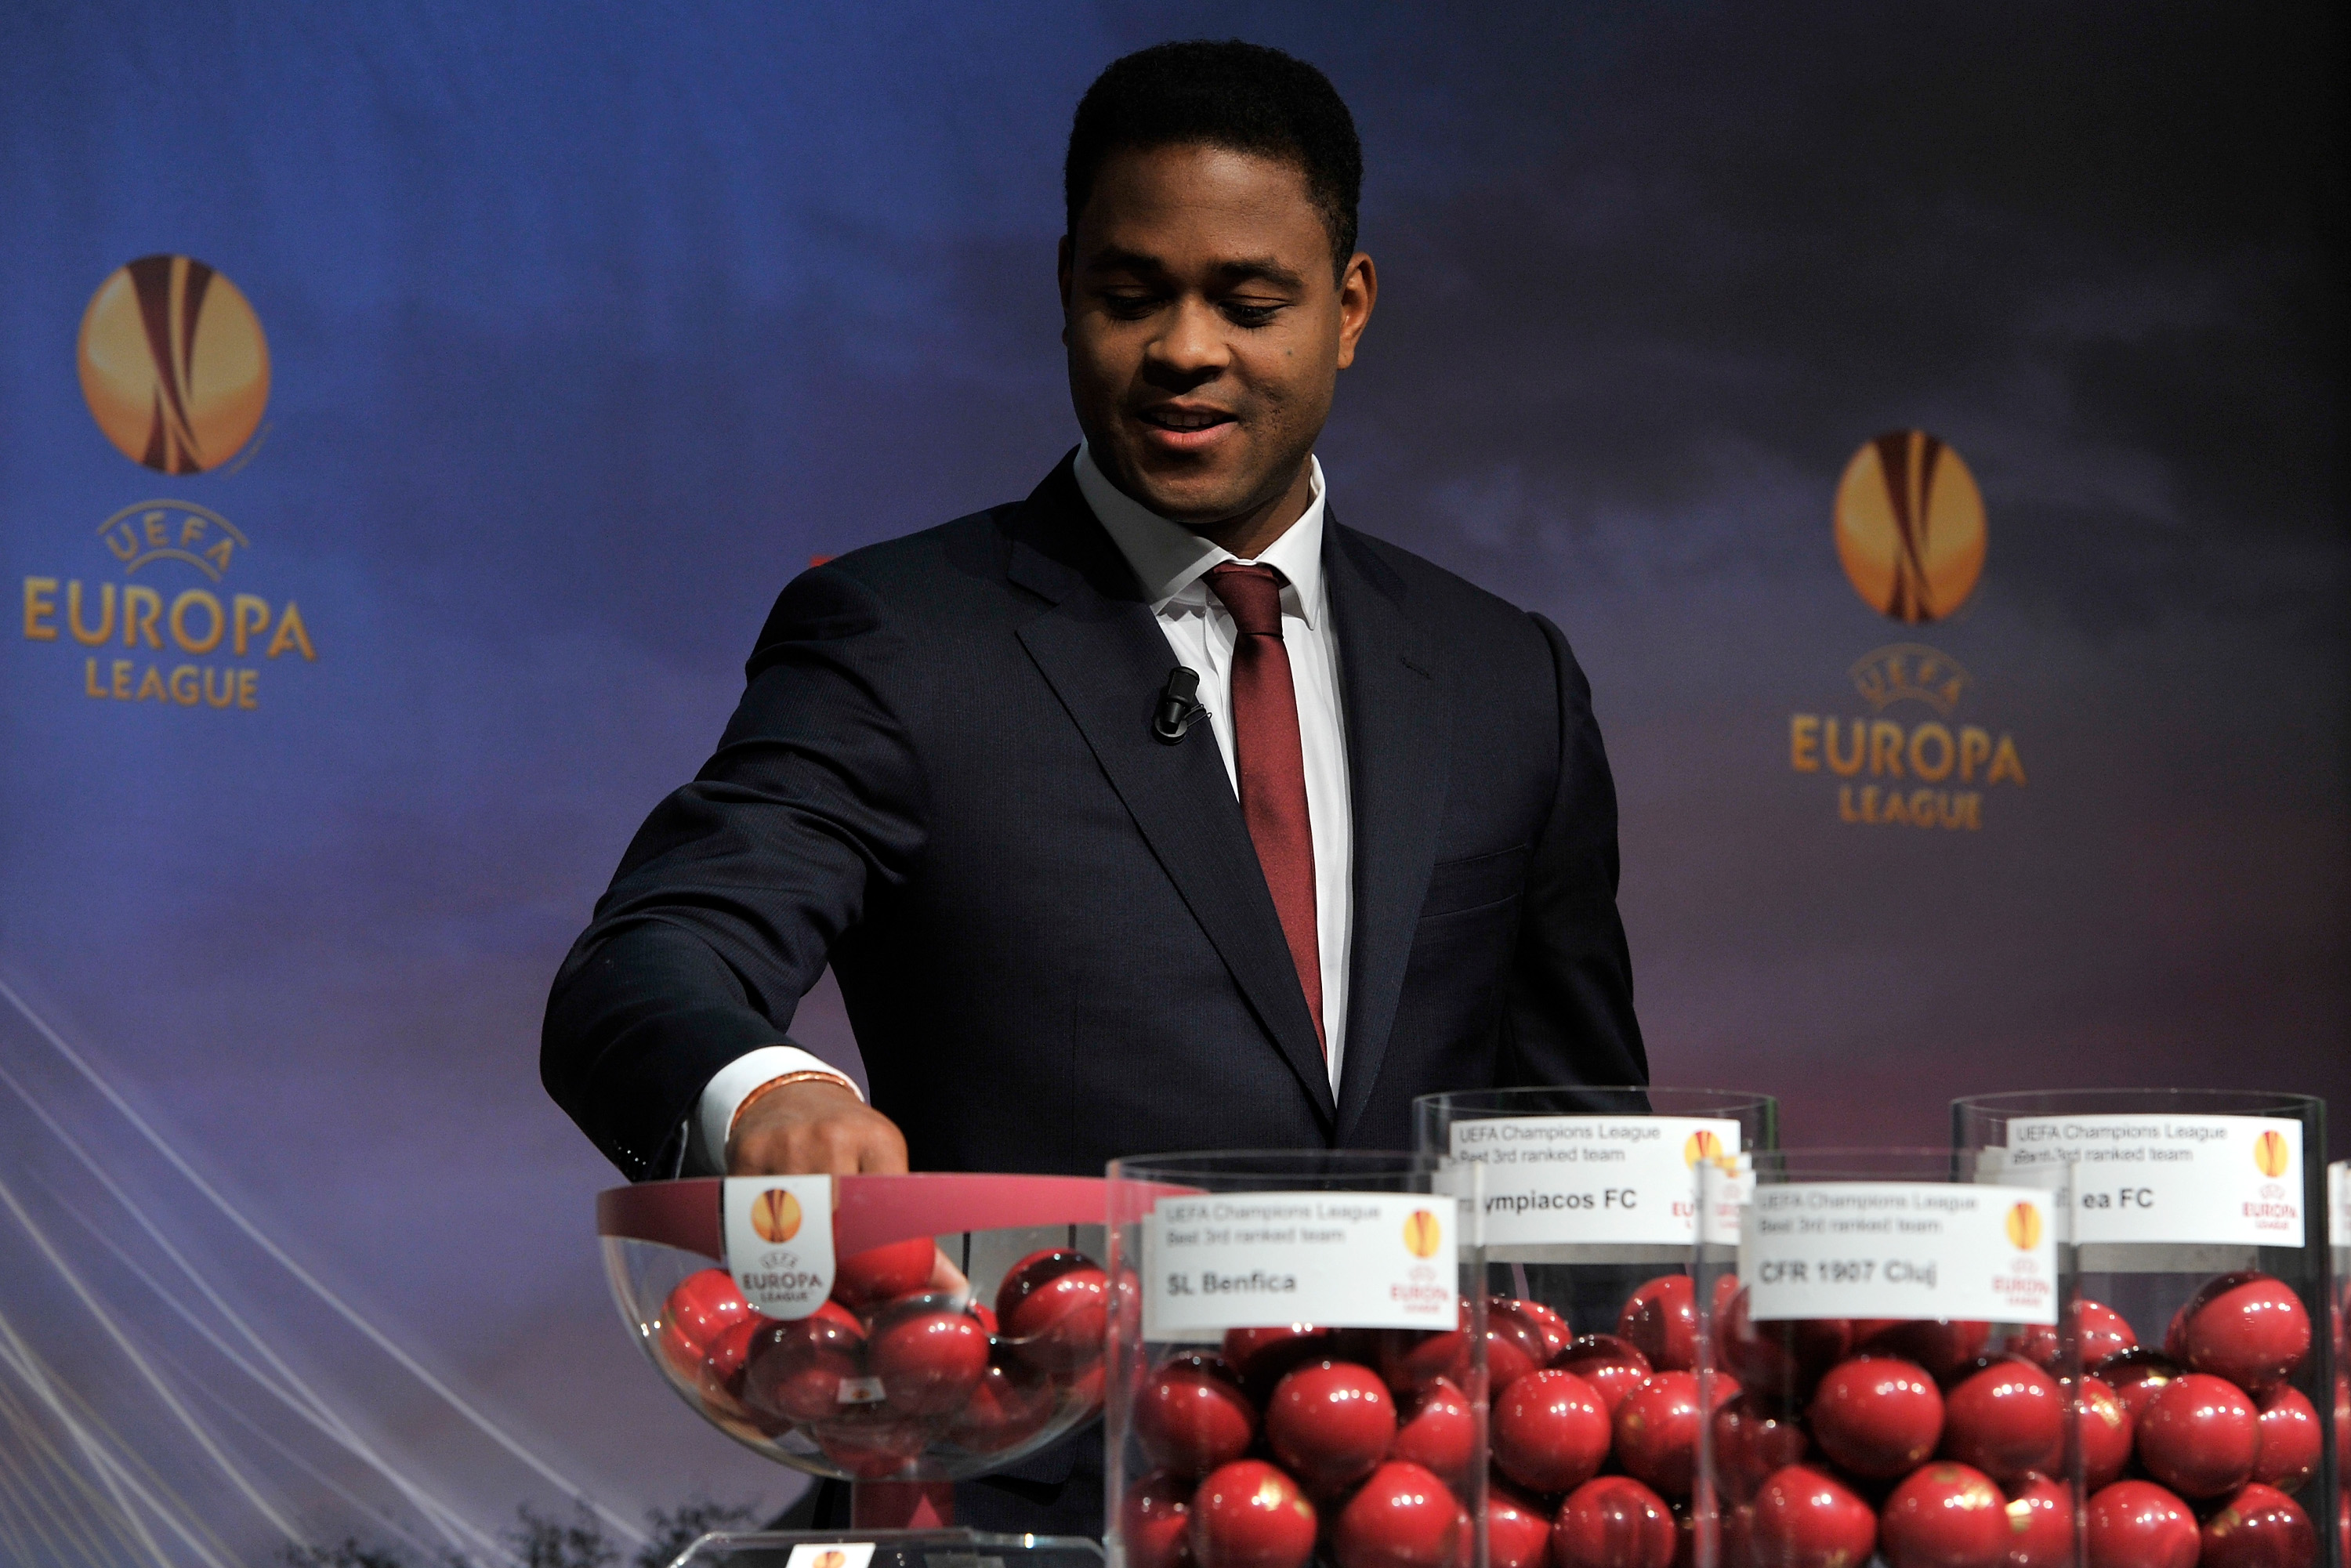 Europa League and Conference League group stage draw details